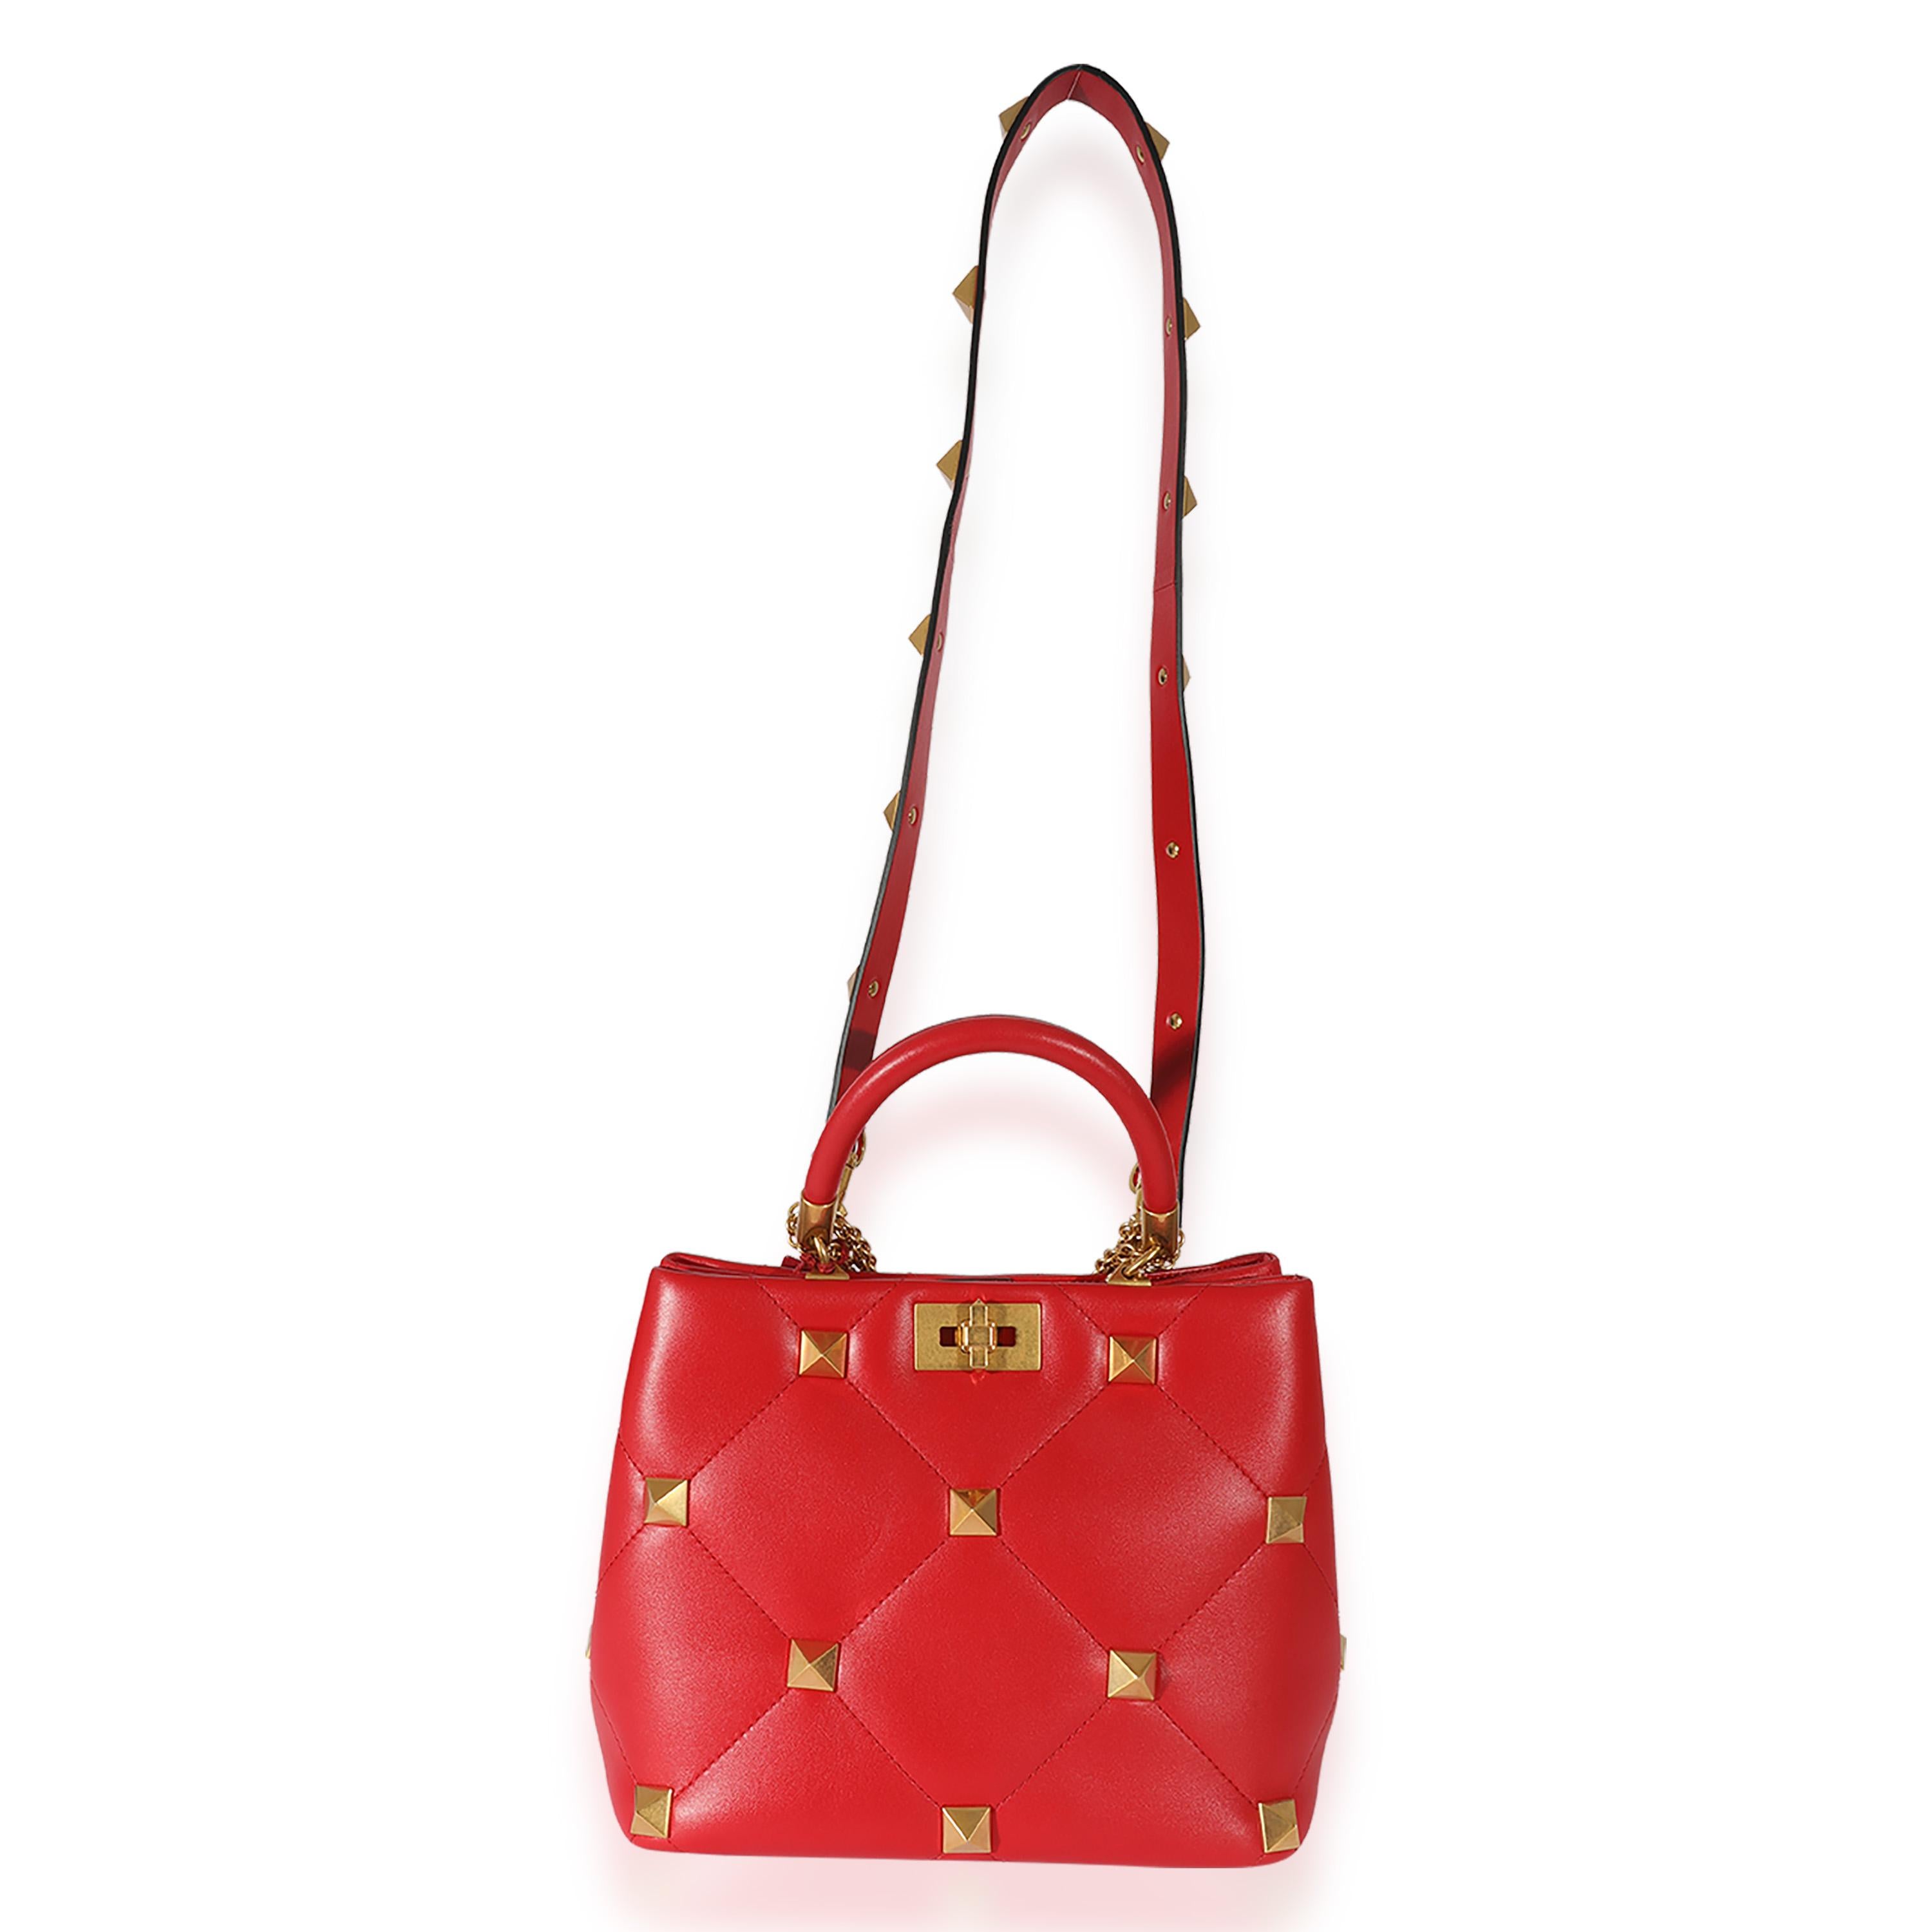 Listing Title: Valentino Red Leather Roman Stud Top Handle
SKU: 126382
MSRP: 3400.00
Condition: Pre-owned 
Handbag Condition: Very Good
Condition Comments: Very Good Condition. Scuffing and marks at strap. Faint scuffing at corners, base and